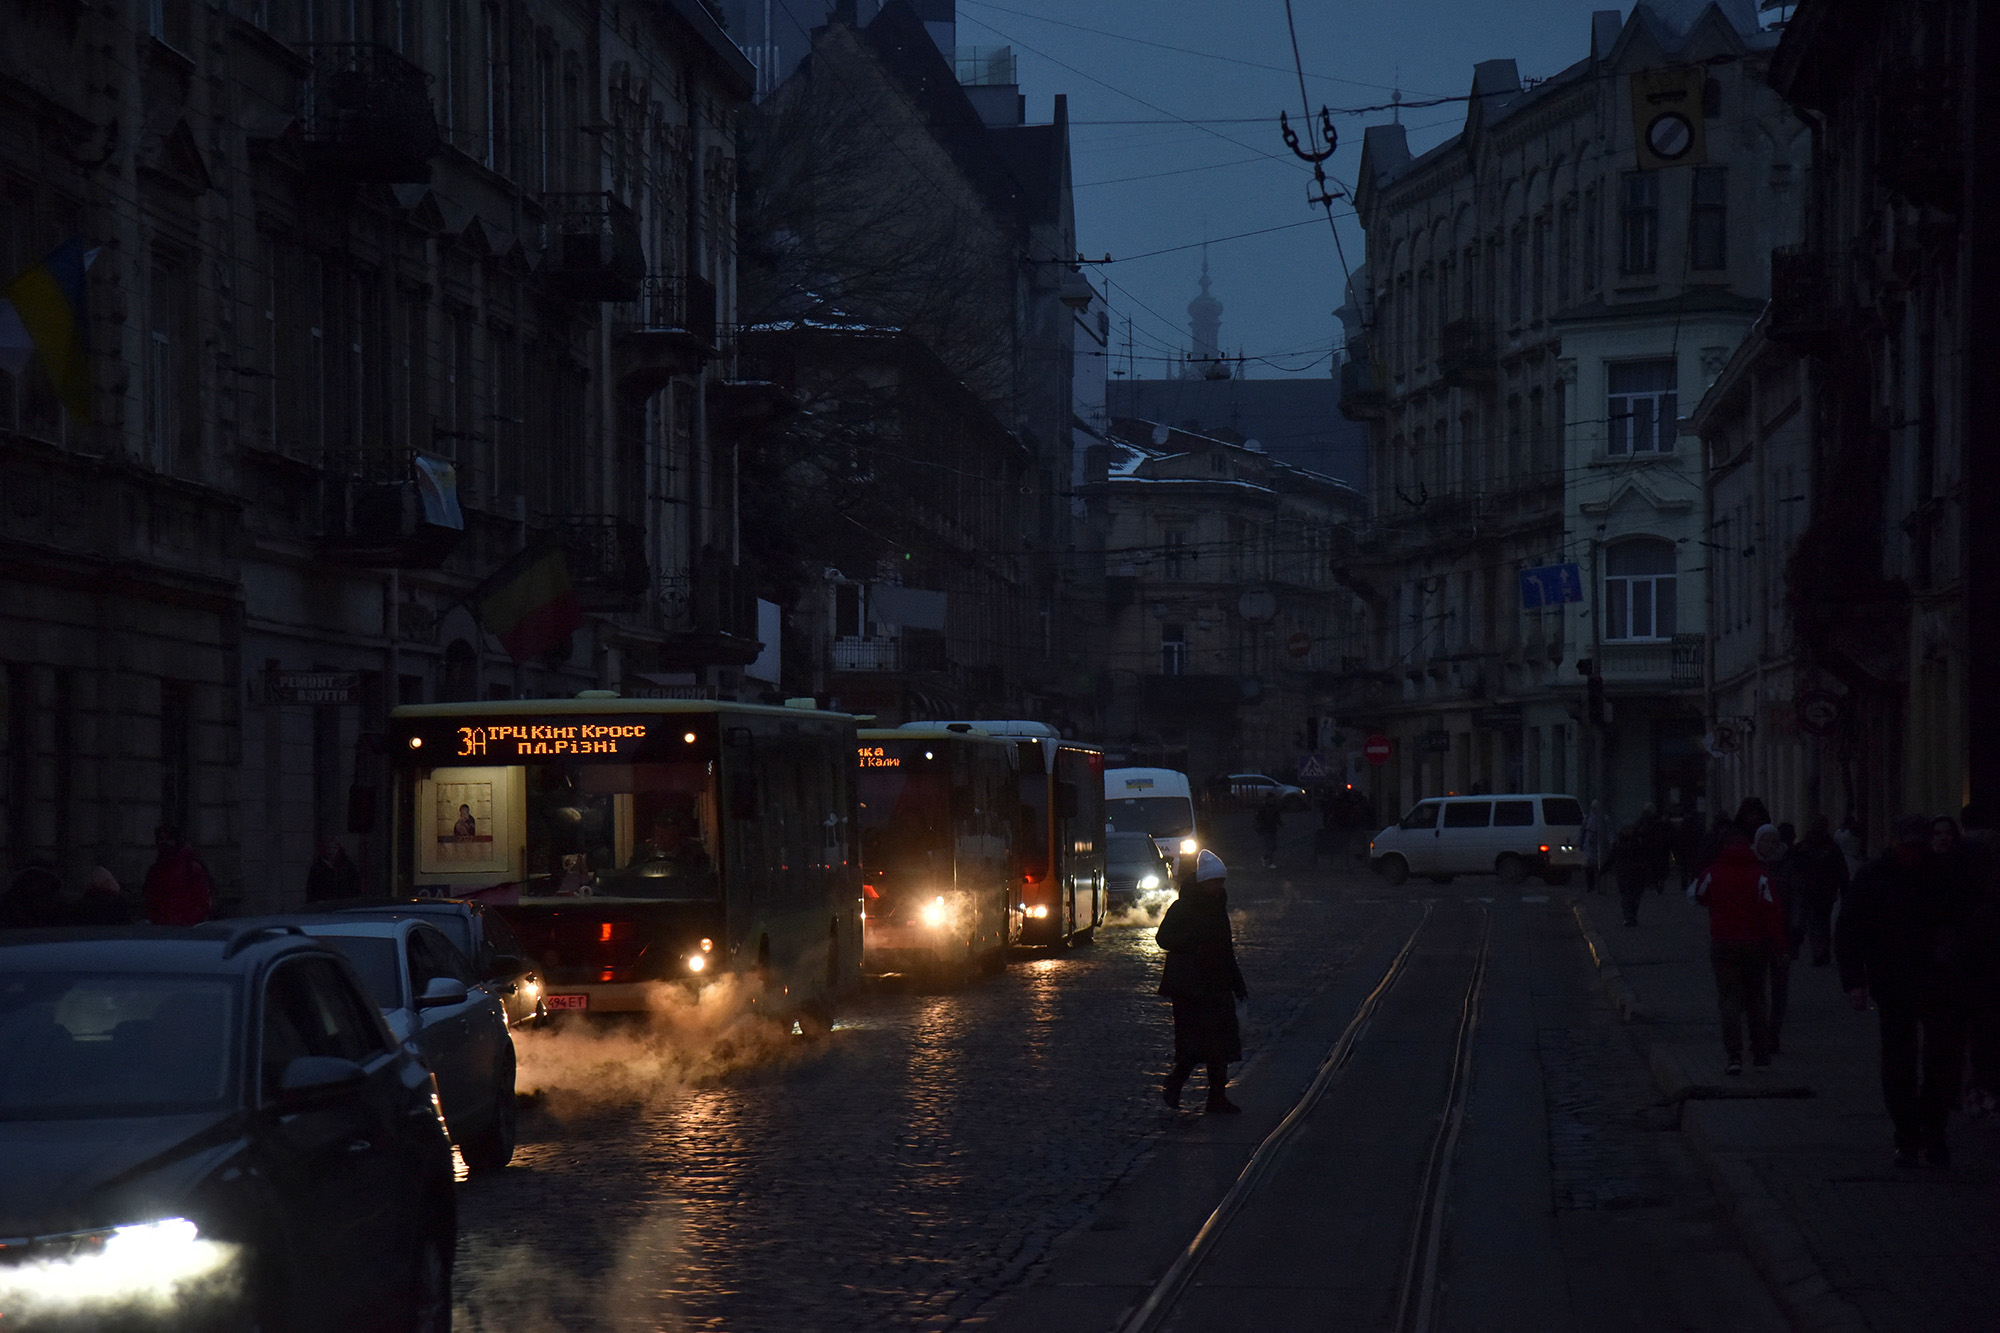 The city centre of Lviv without electricity after critical civil infrastructure was hit by Russian missile attacks on November 23.